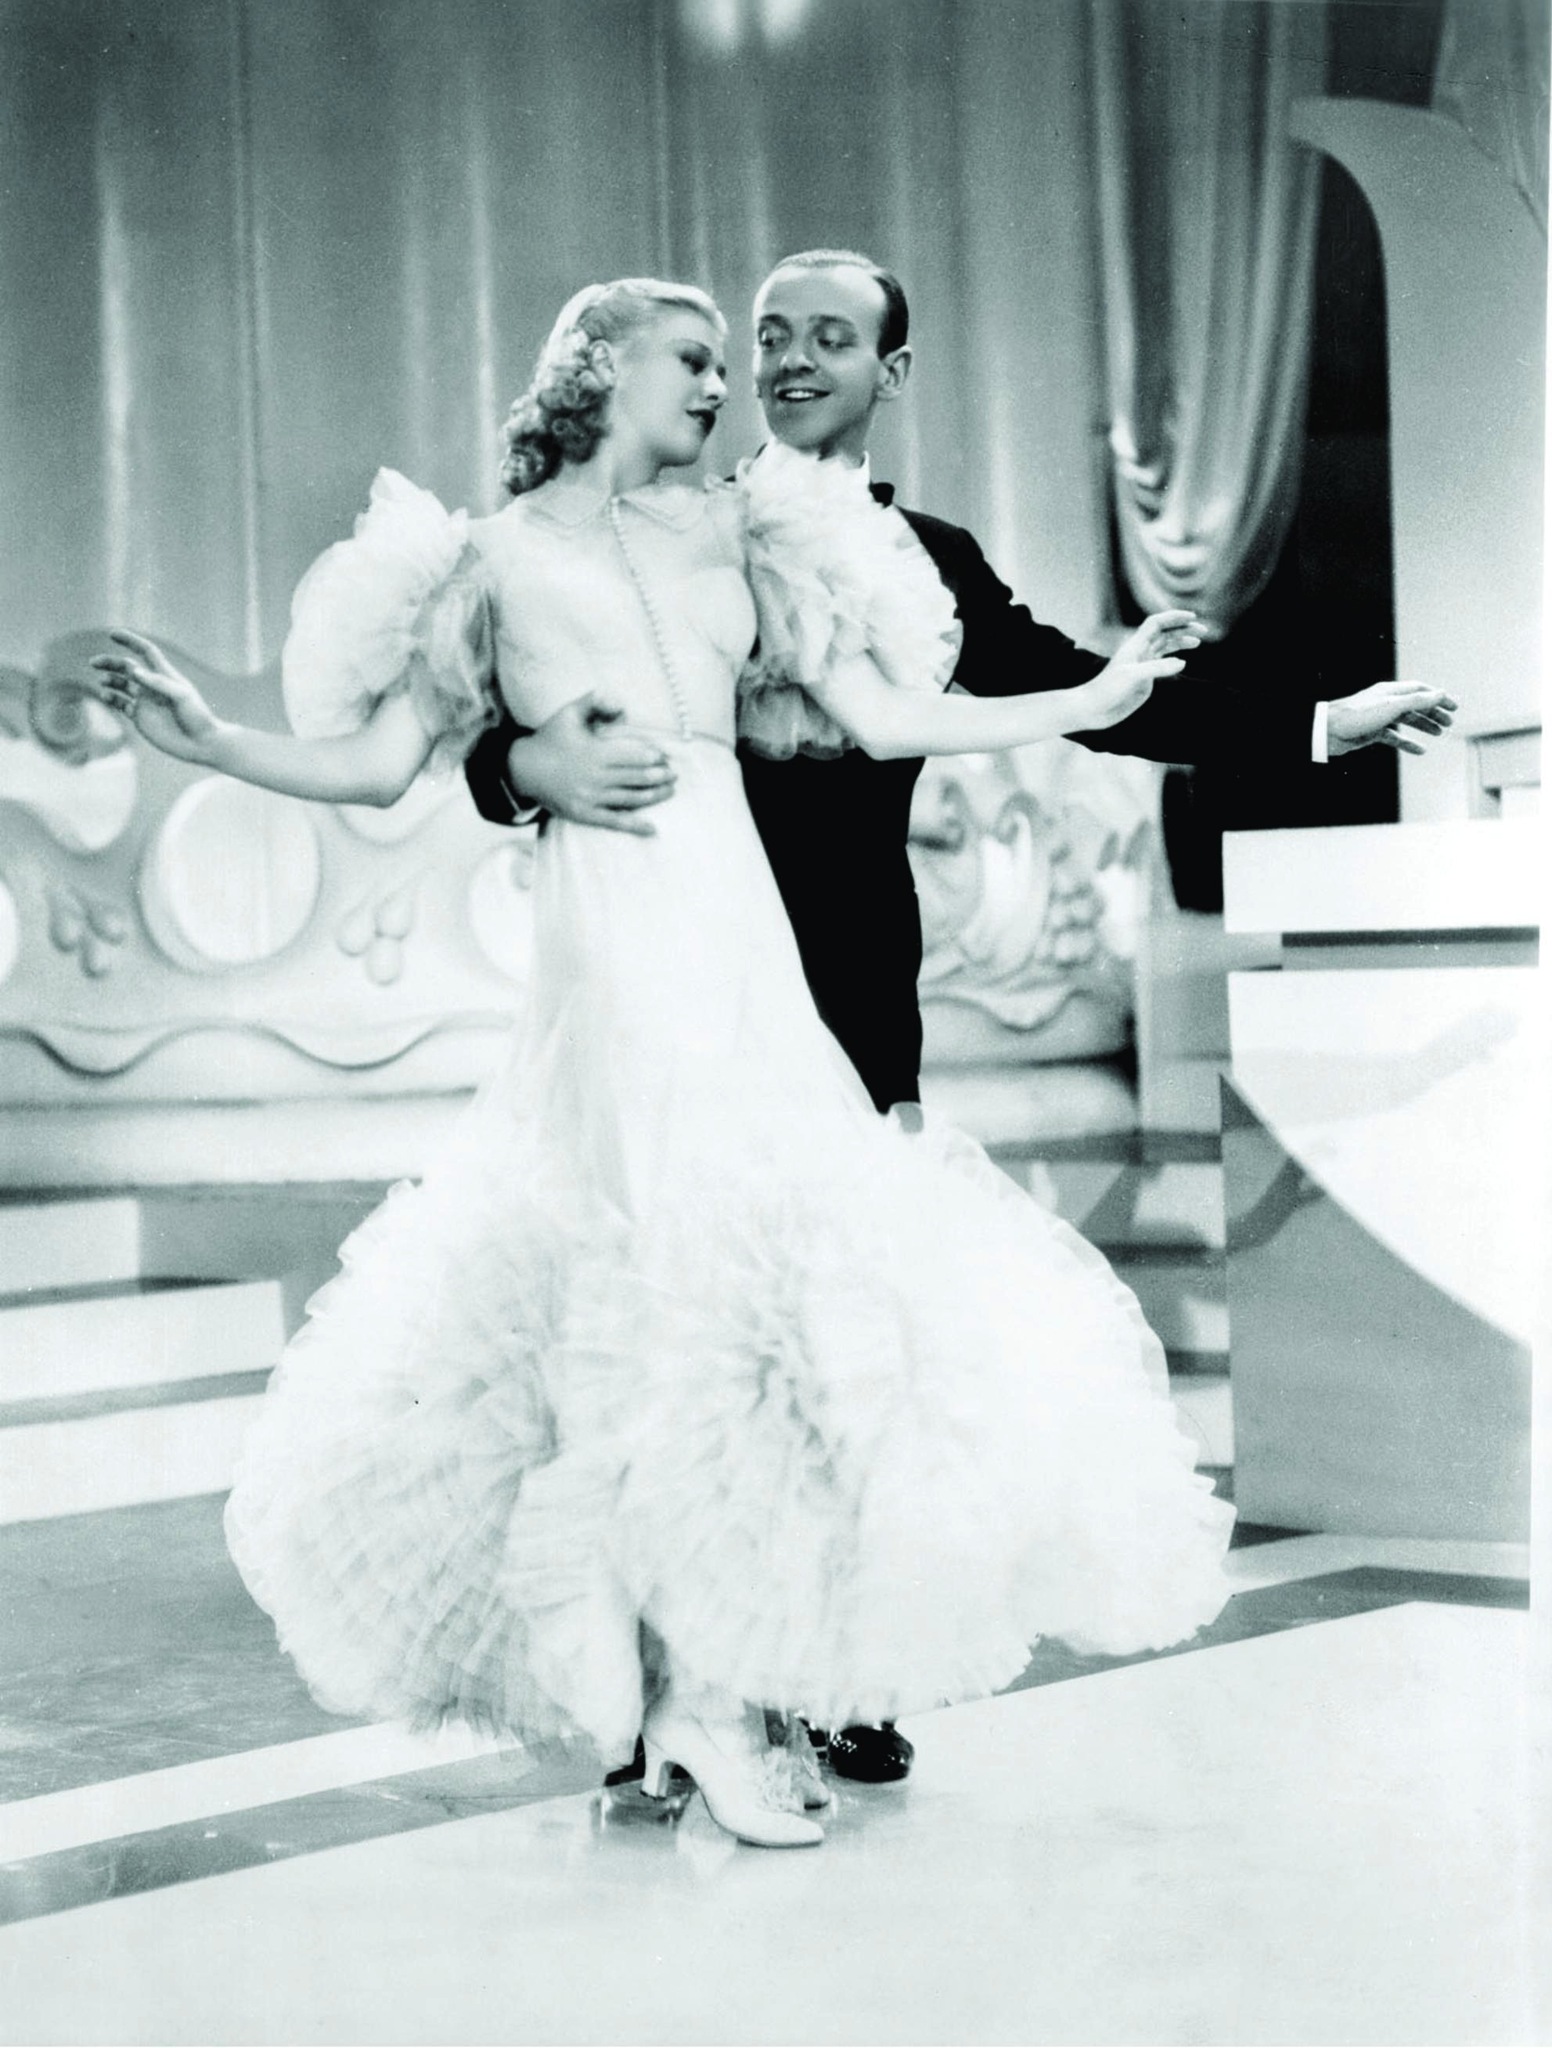 Still of Fred Astaire and Ginger Rogers in Swing Time (1936)